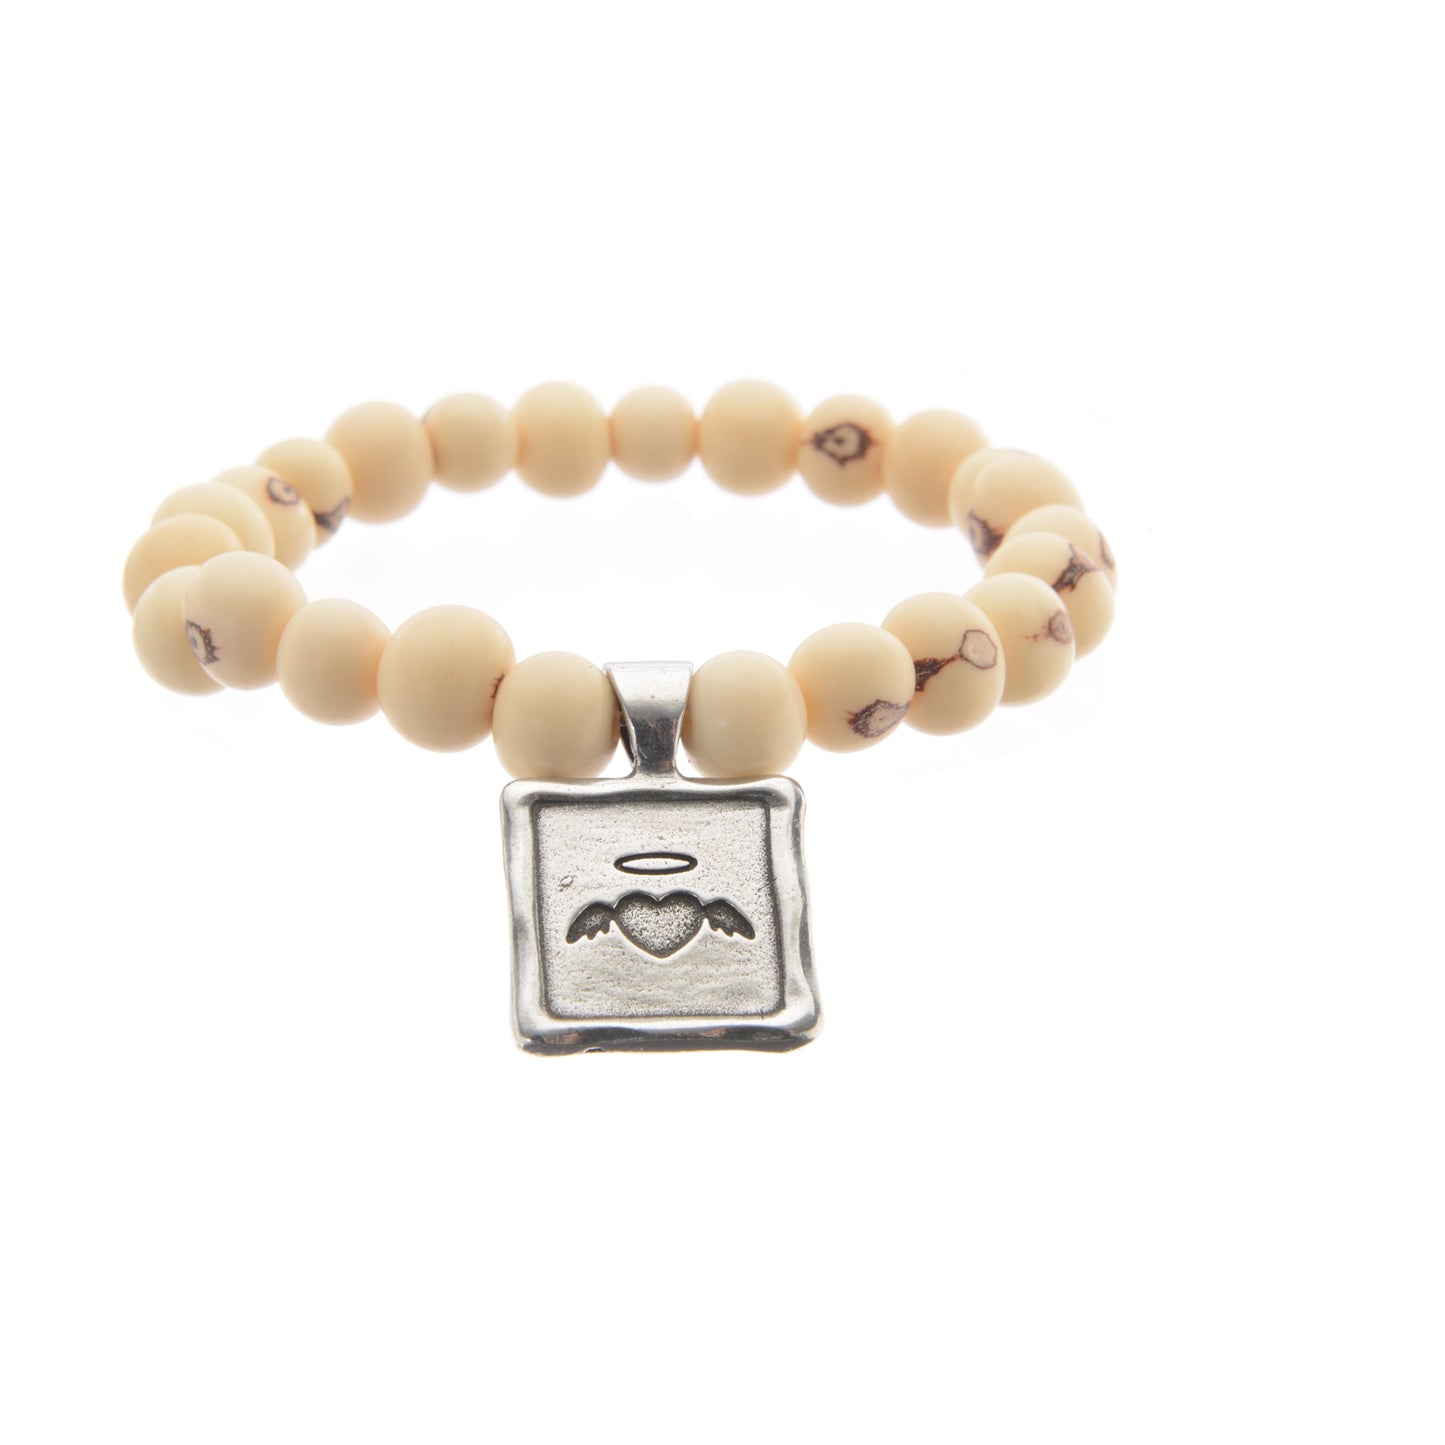 Acai Seeds Of Life Bracelet with Wax Seal - White Beads